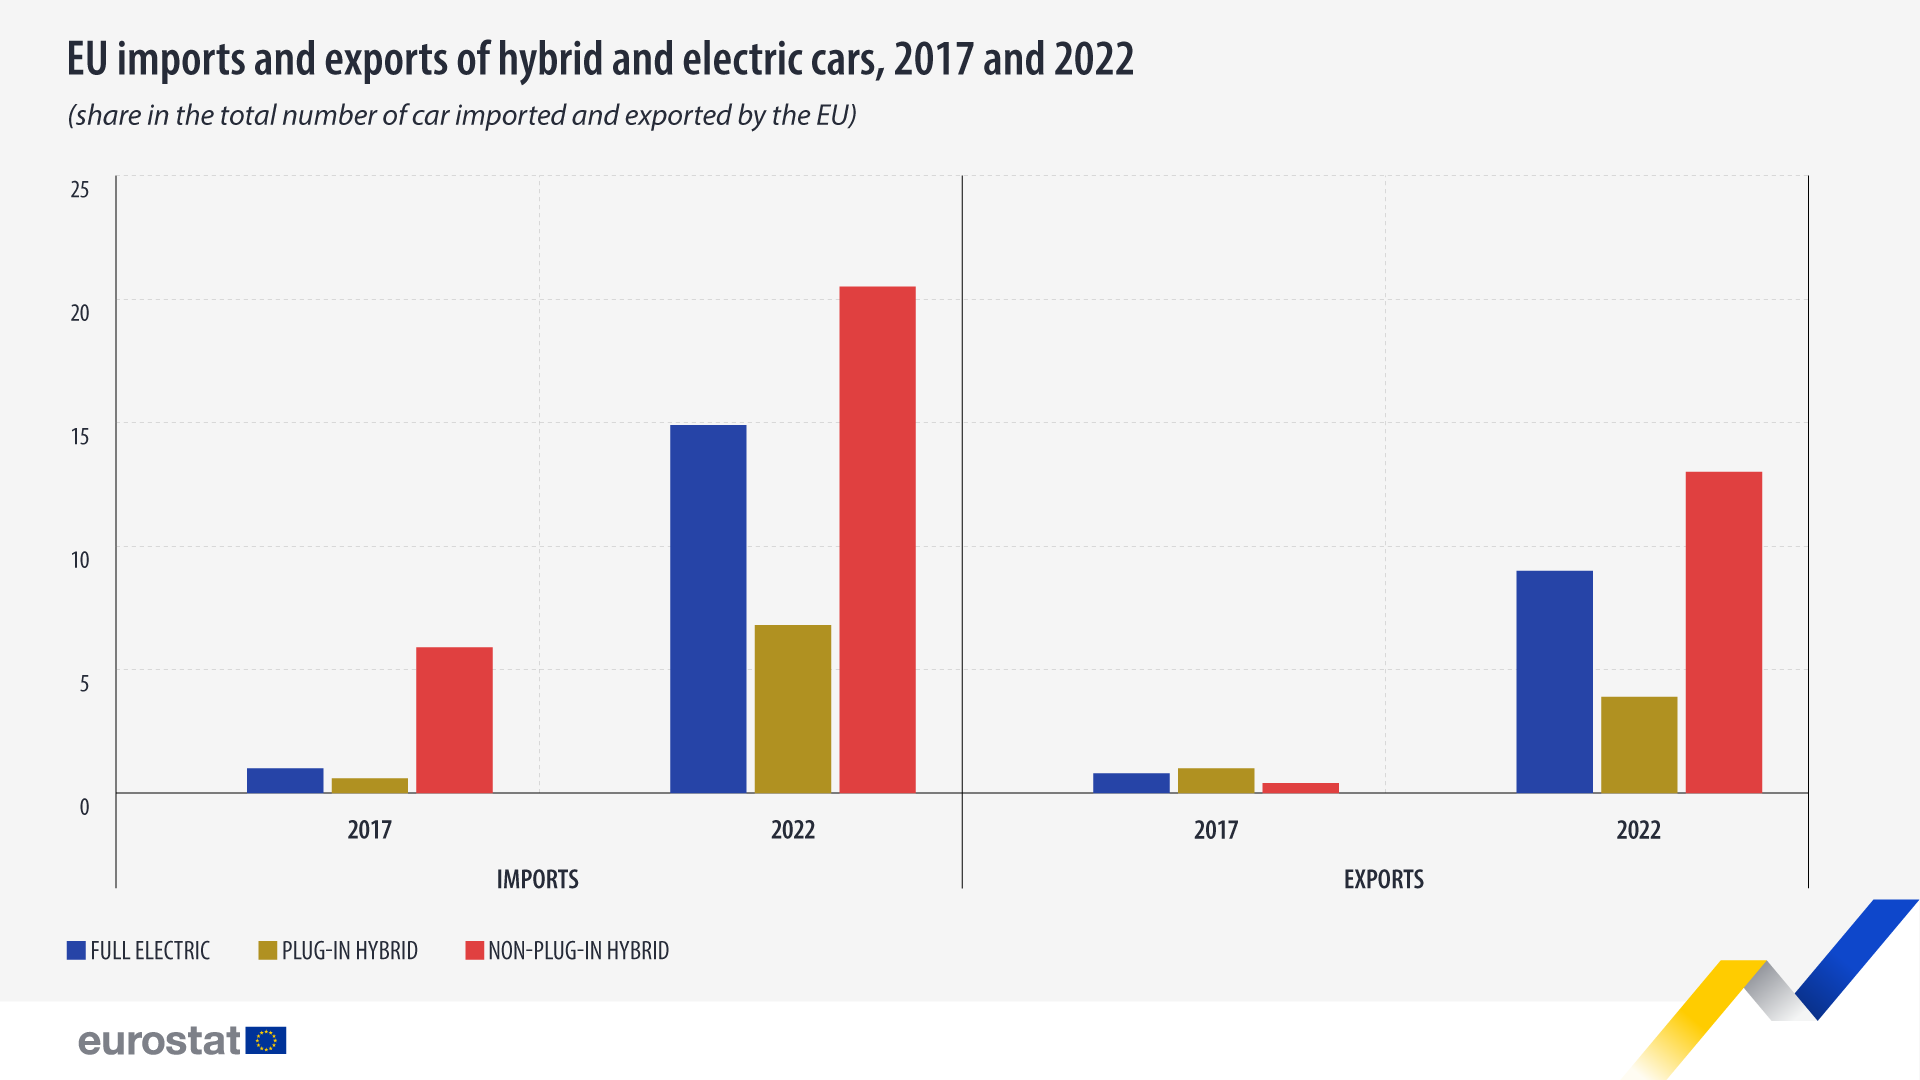 Bar chart: EU imports and exports of hybrid and electric cars, 2017 and 2022, share in the total number of car imported and exported by the EU